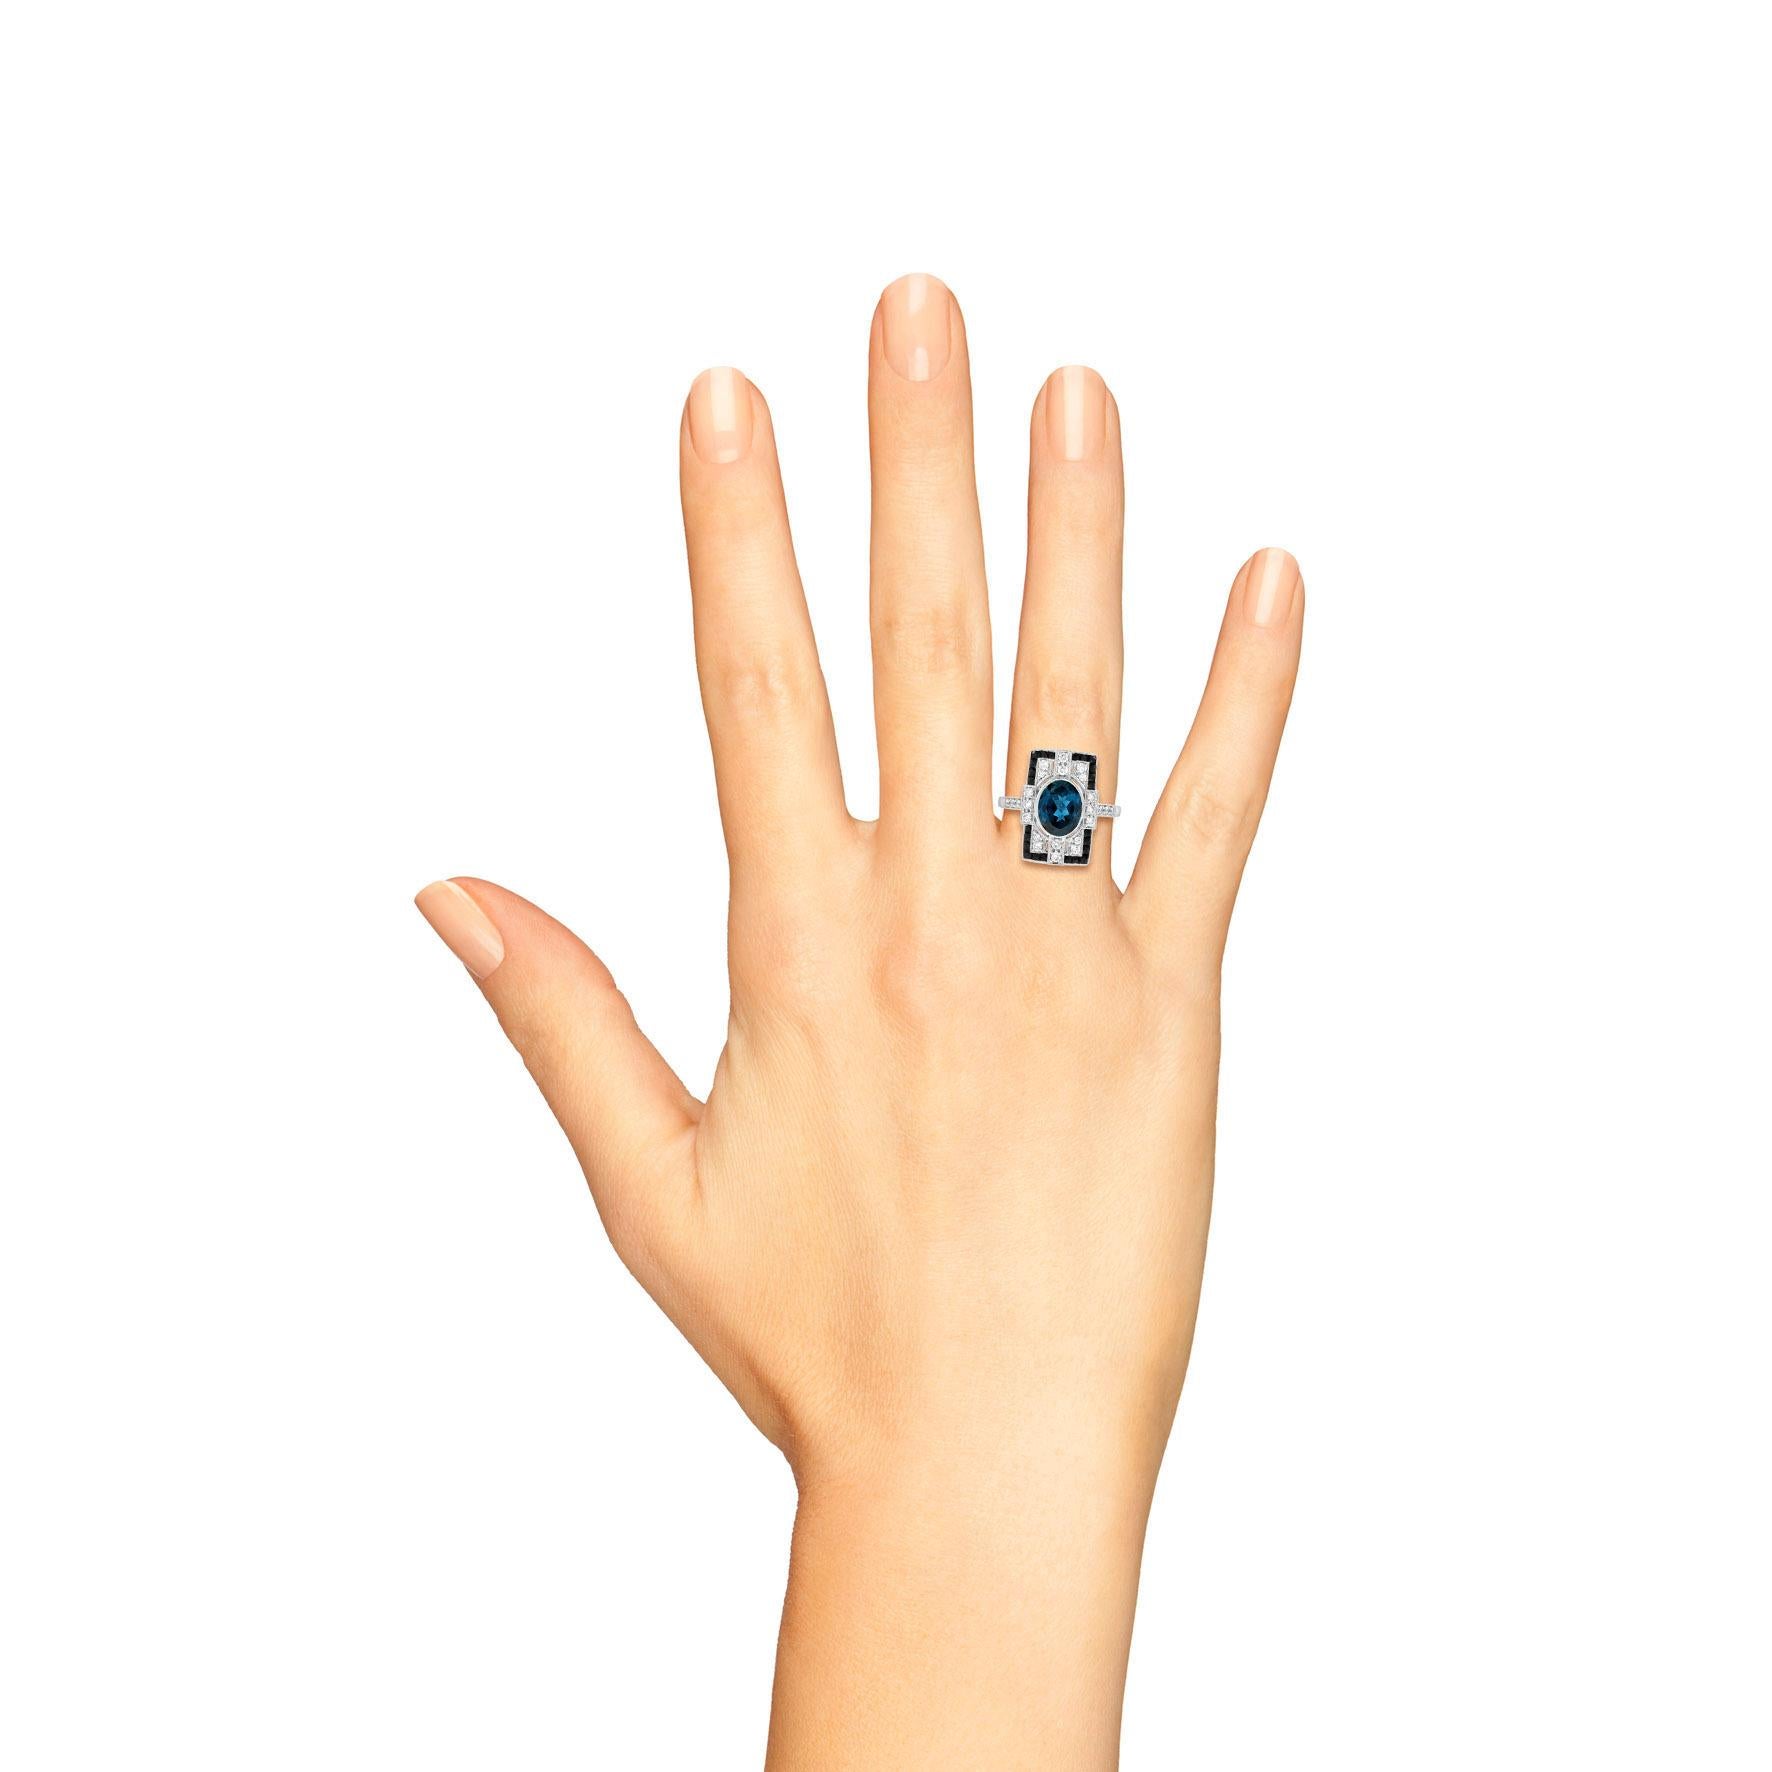 A captivating composition of complementary colors, blue and black, along with sparking white light harmonize and give life to this stunning and impressive jewel. An oval deep blue hue London blue topaz glistens from within a sleek bezel and is